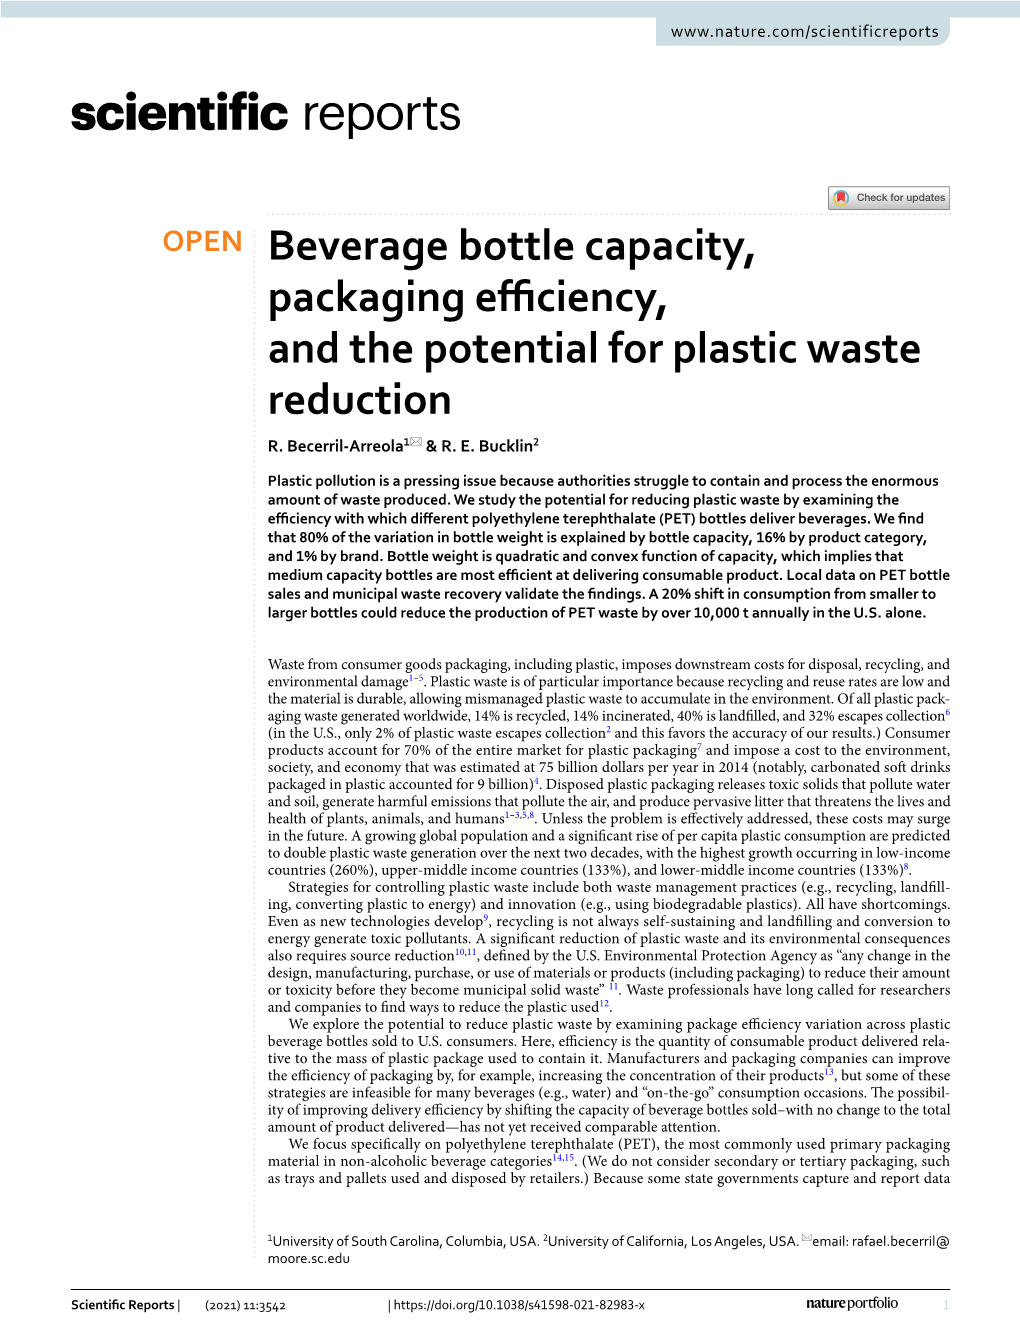 Beverage Bottle Capacity, Packaging Efficiency, and the Potential For